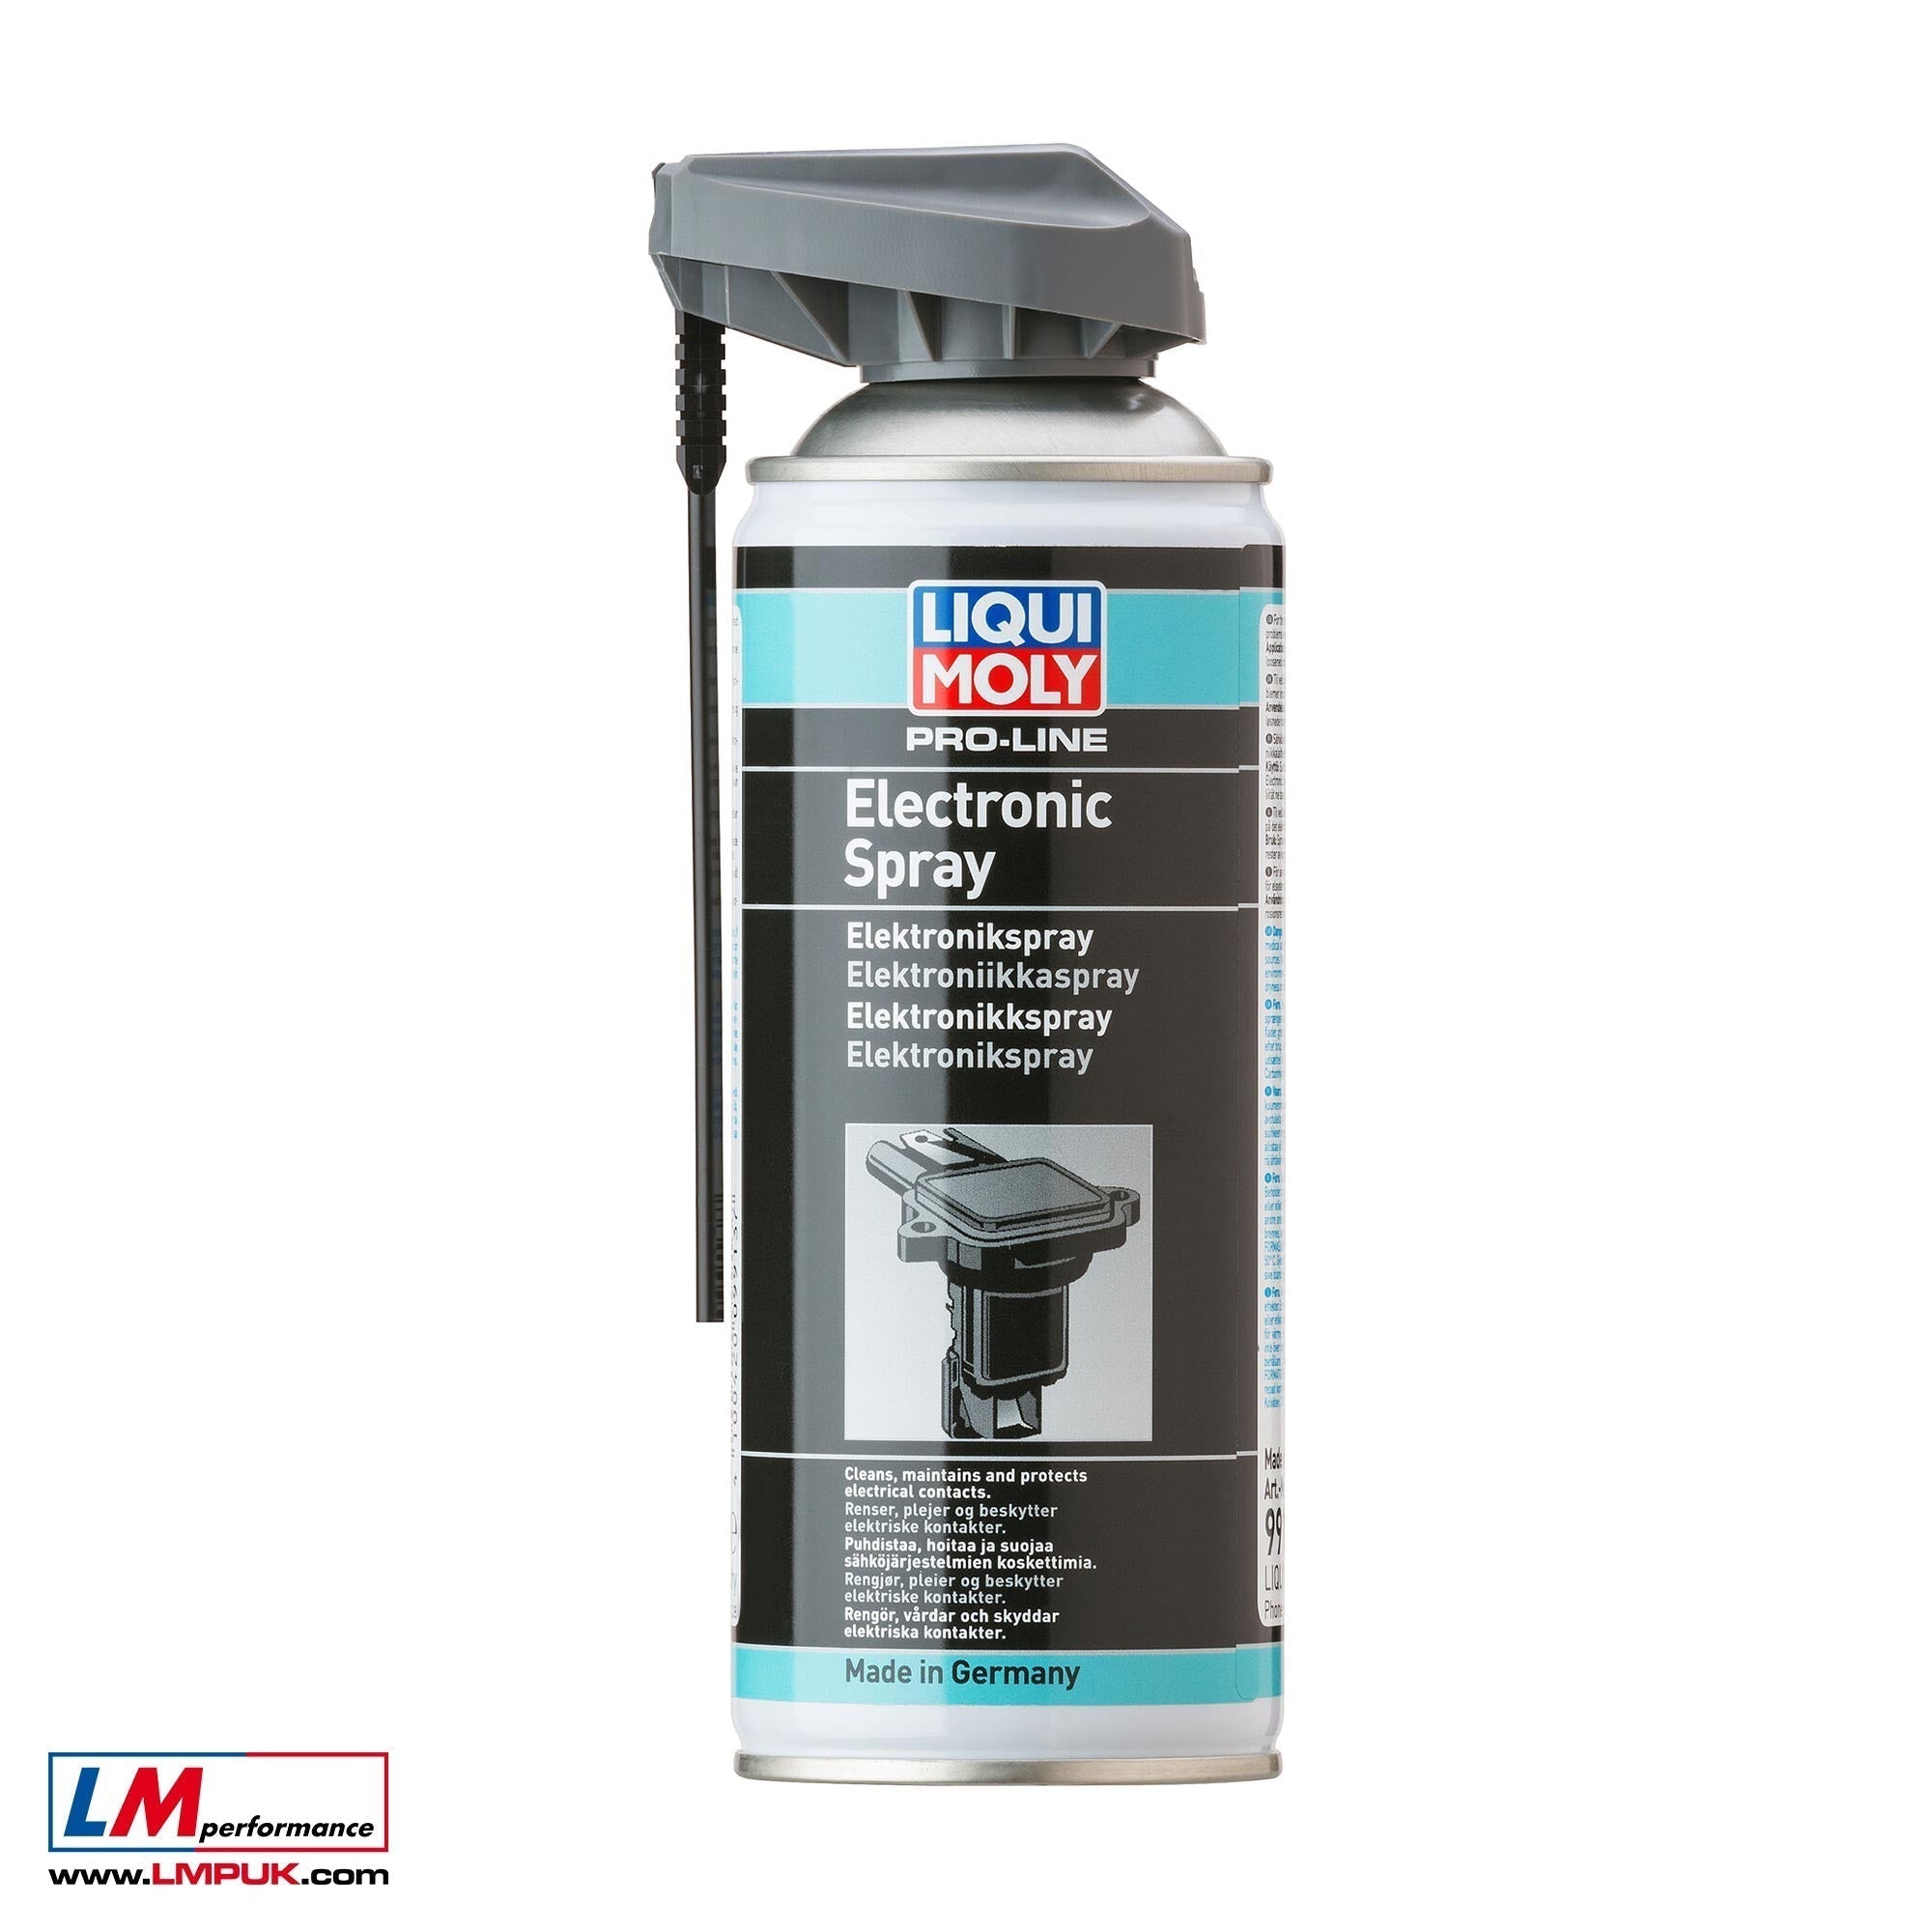 Pro-Line Electronic Spray by LIQUI MOLY – LM Performance